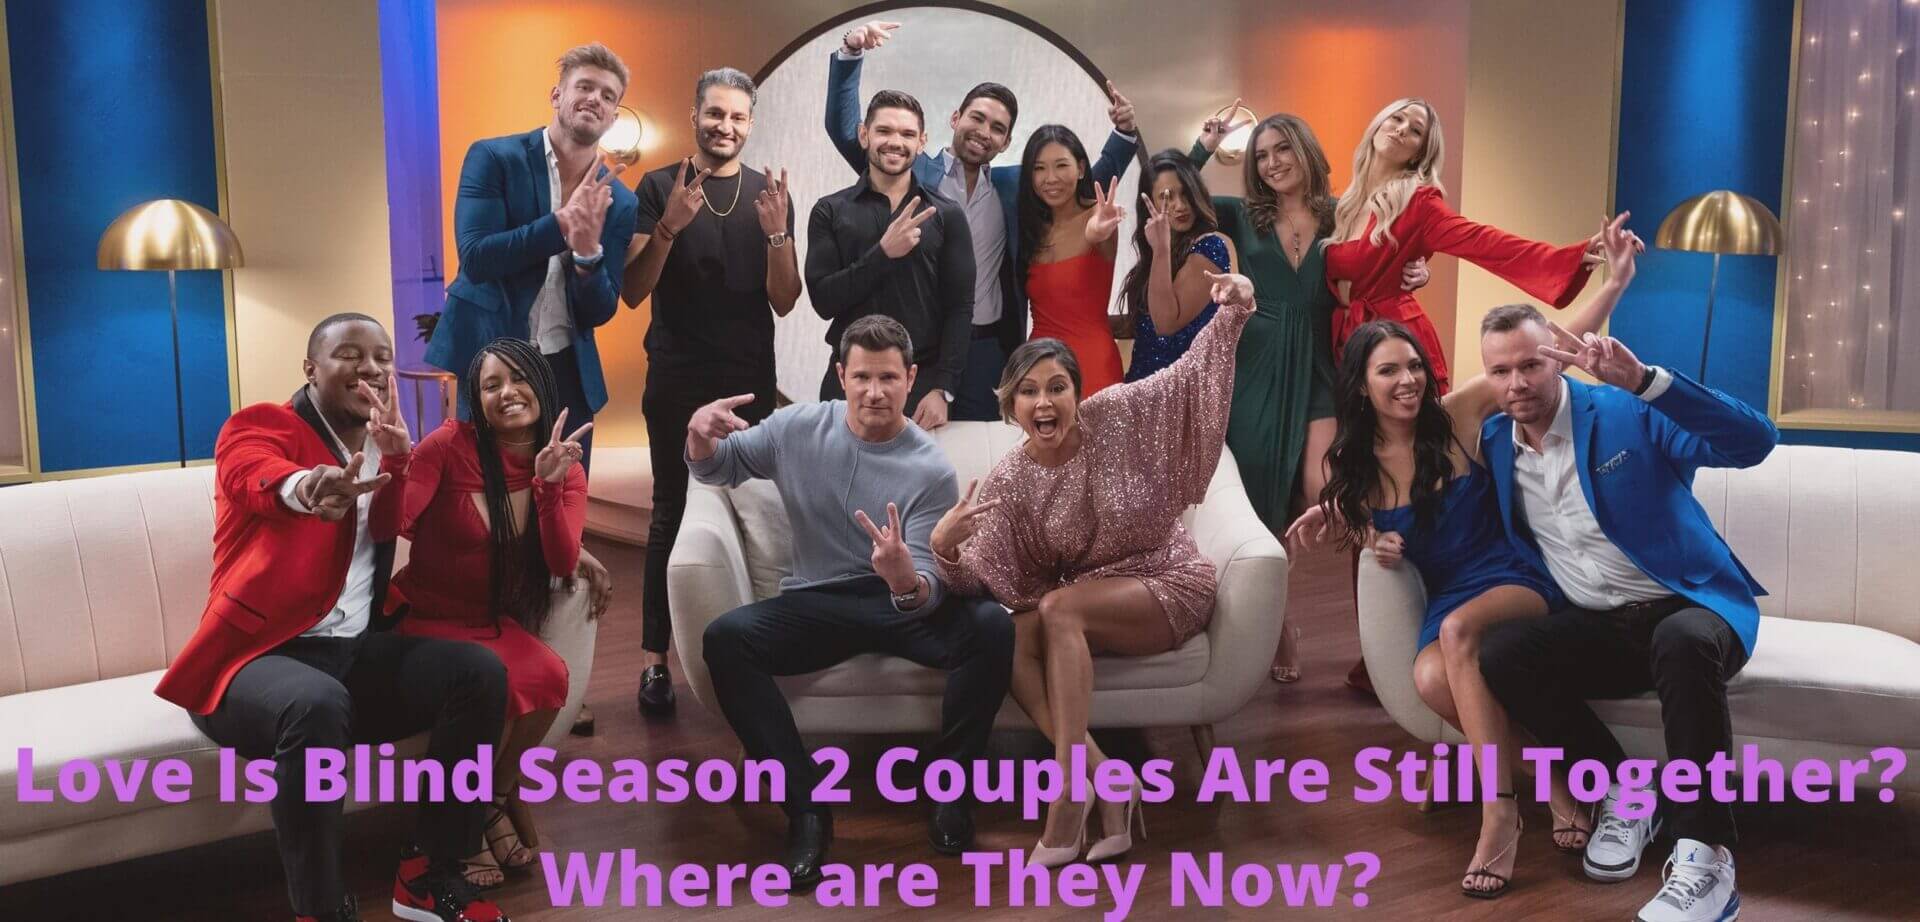 Love Is Blind Season 2 Couples Are Still Together? Where are They Now?